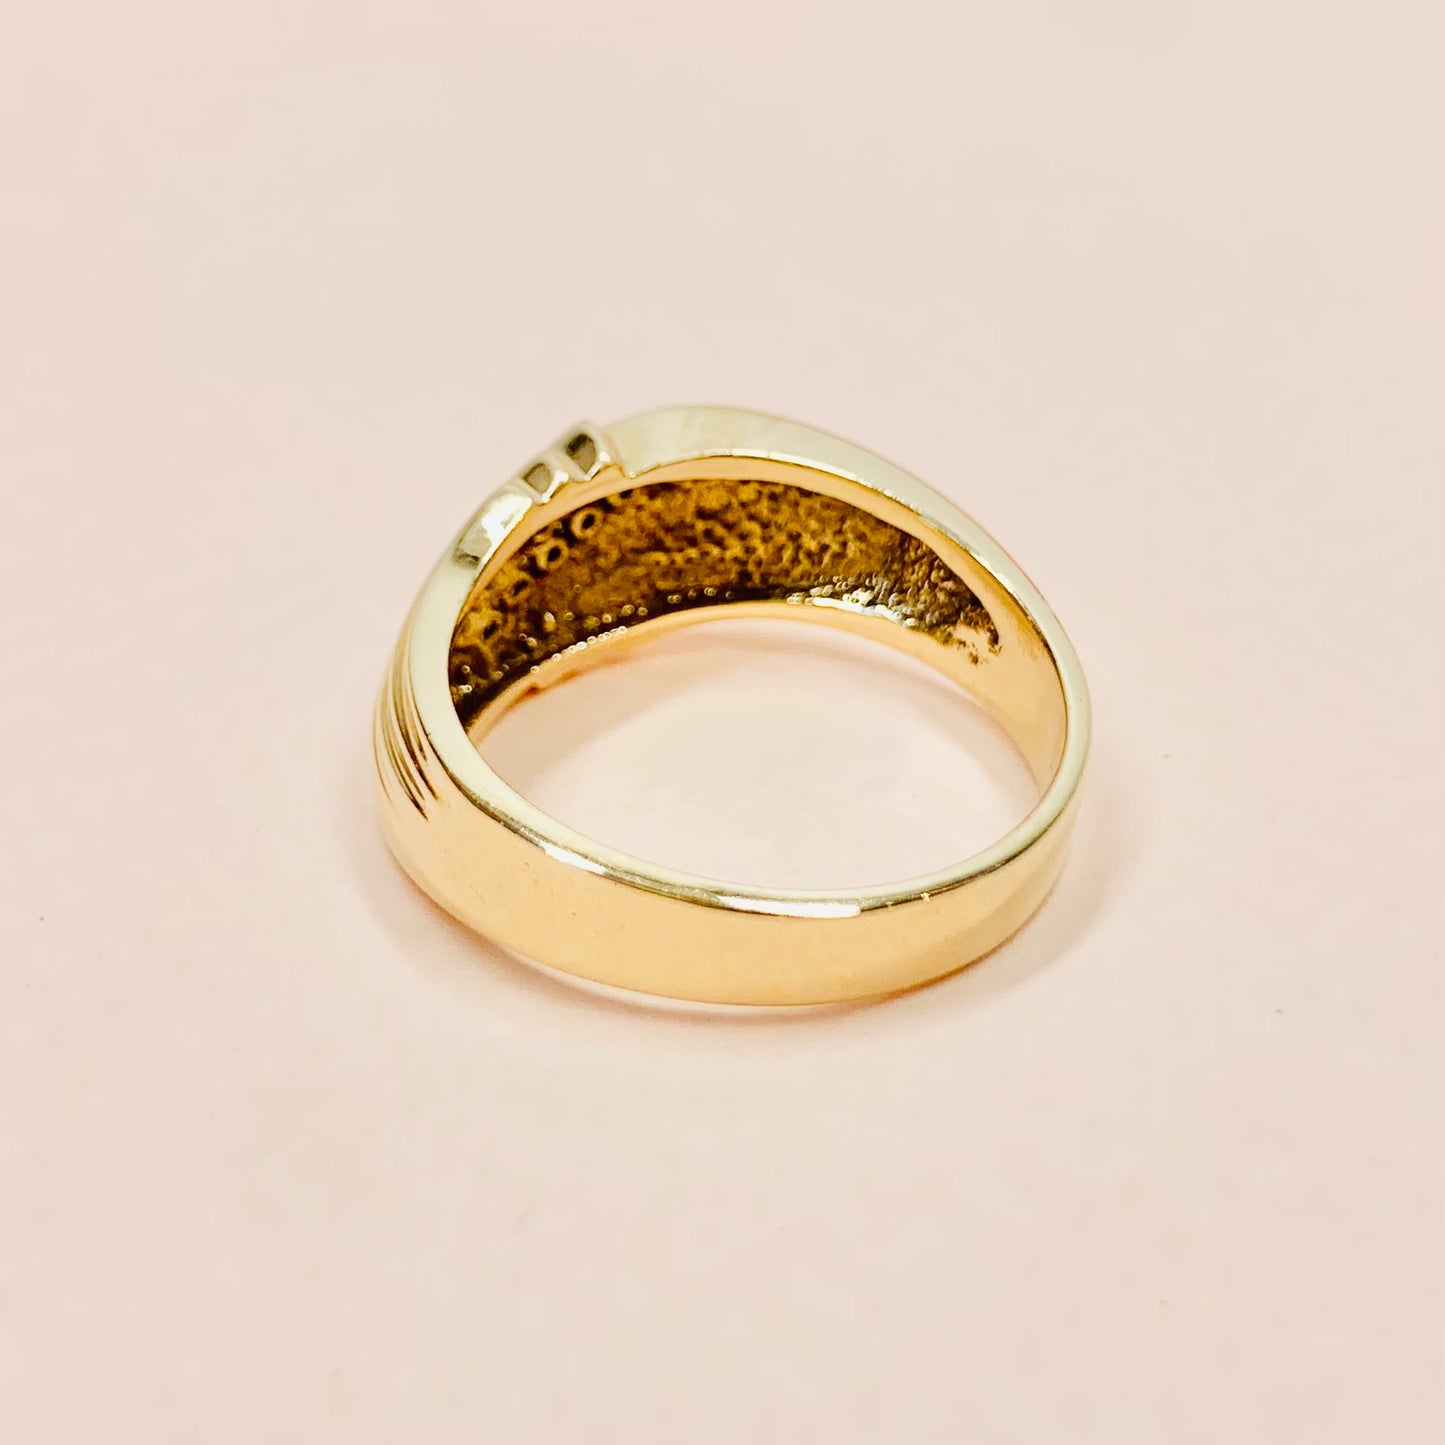 1970s 10K gold ring set with channel diamonds